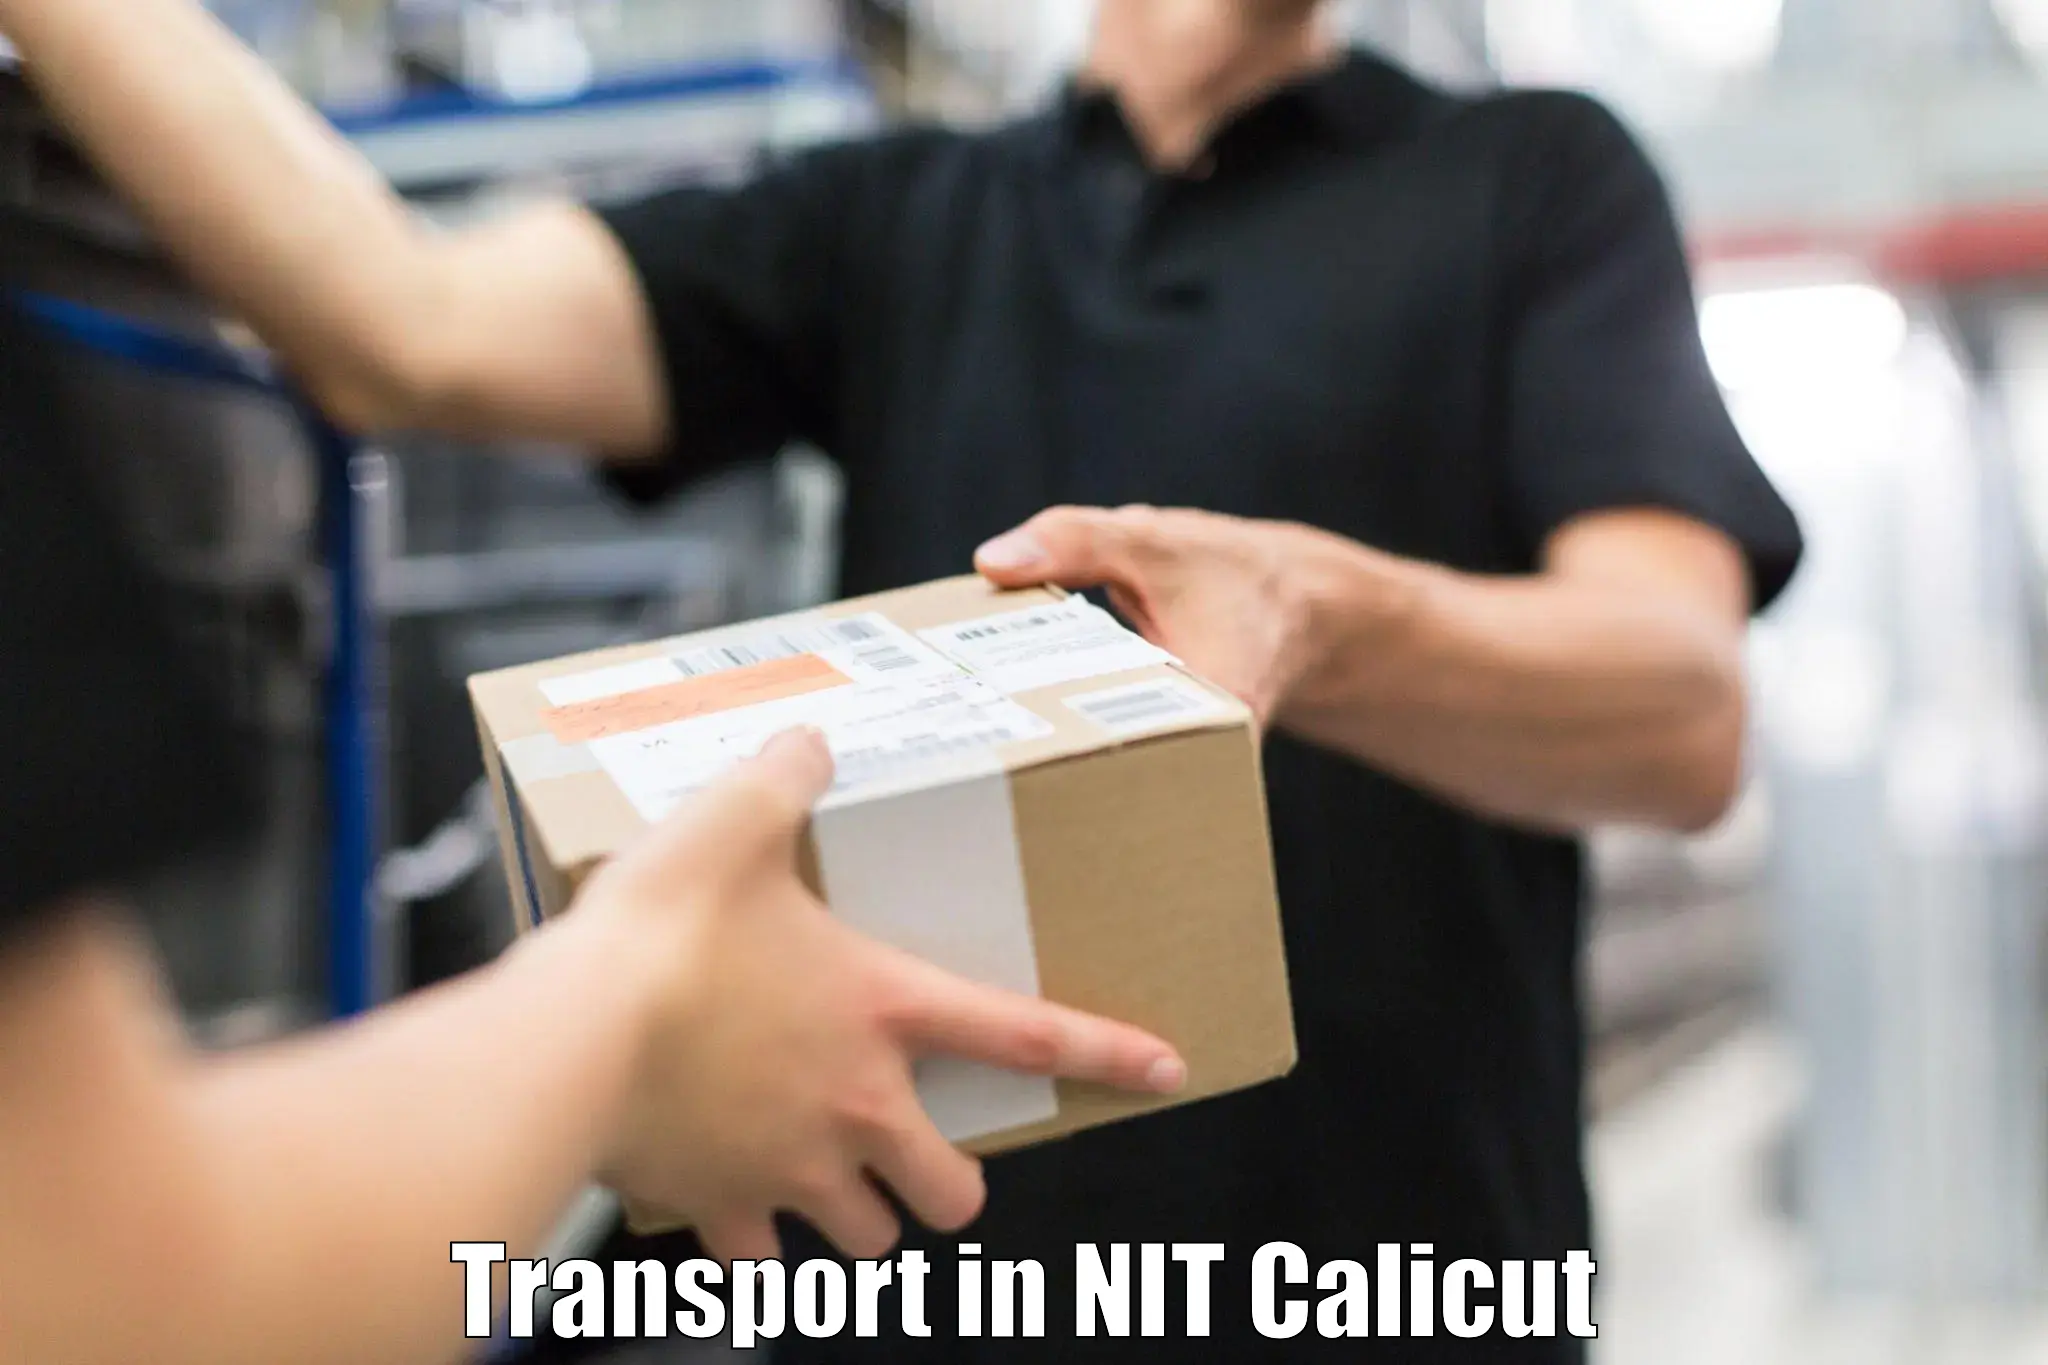 Container transport service in NIT Calicut